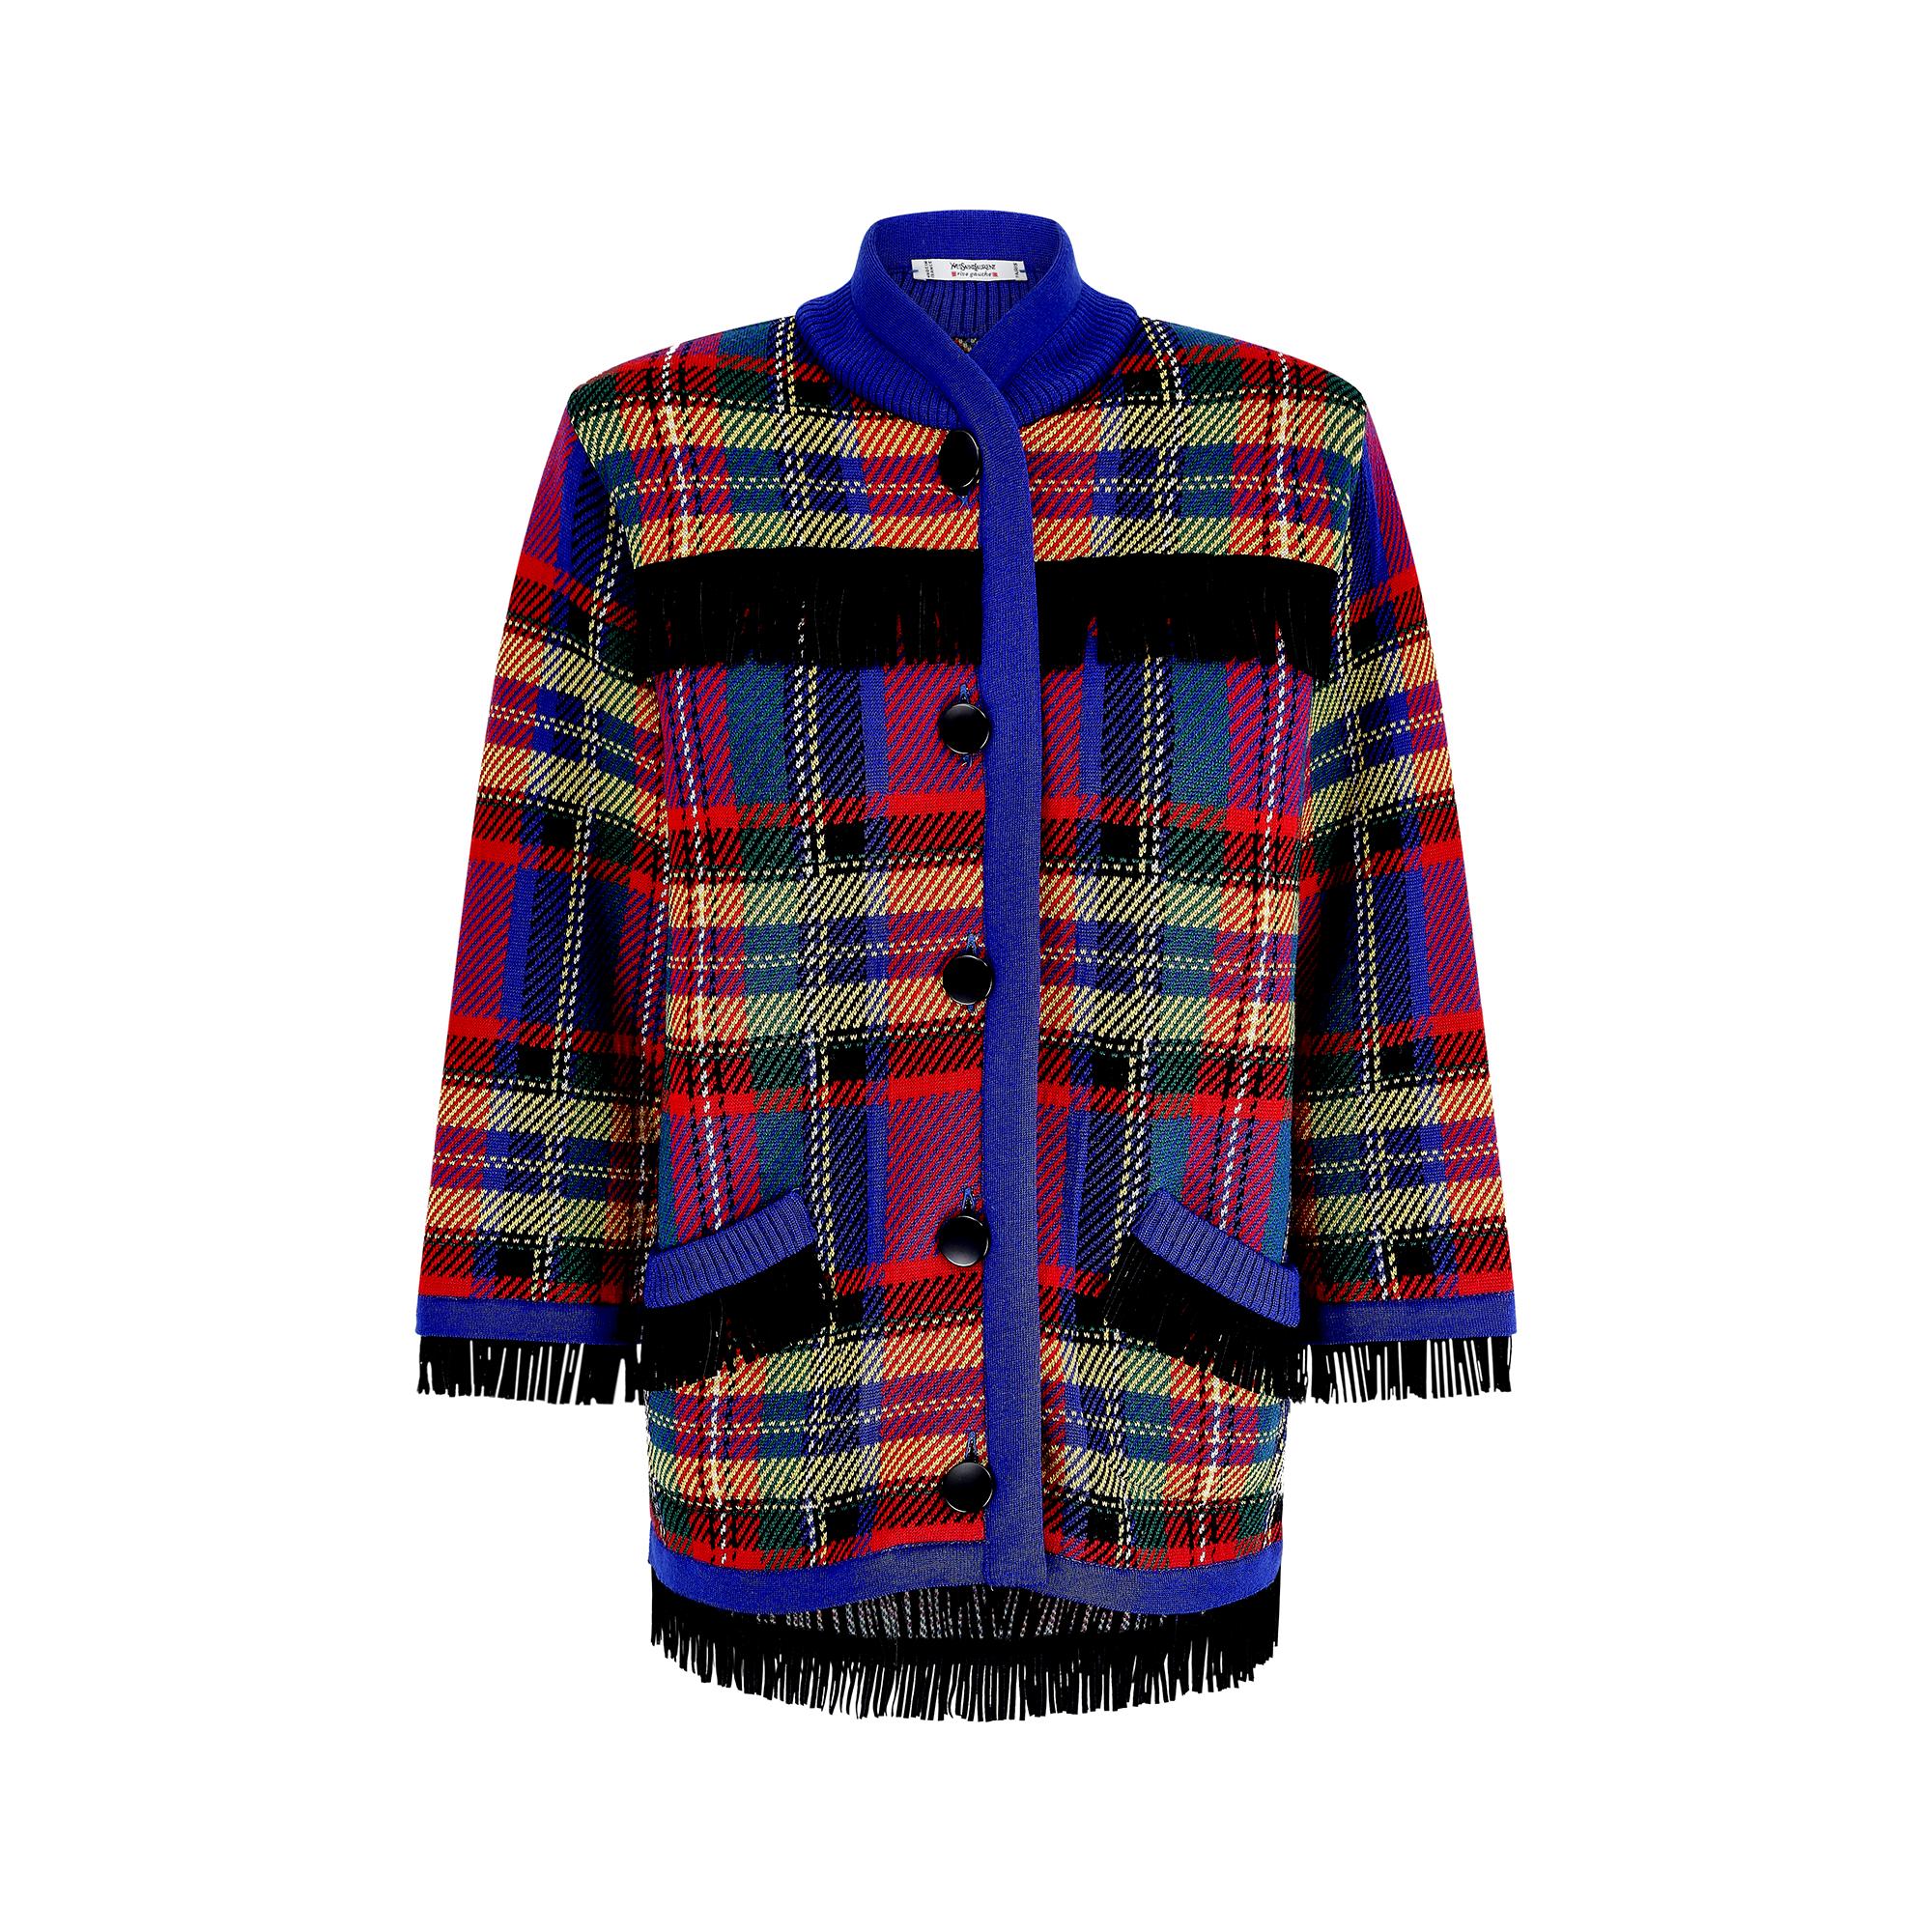 Documented Yves Saint Laurent tartan woolen jacket from the autumn / winter 1992 Ready to Wear Runway Show and model on the catwalk by Betty Prado.

Oversized fit and made from a soft, knitted 100% lamb wool, it features an unusual black fringe